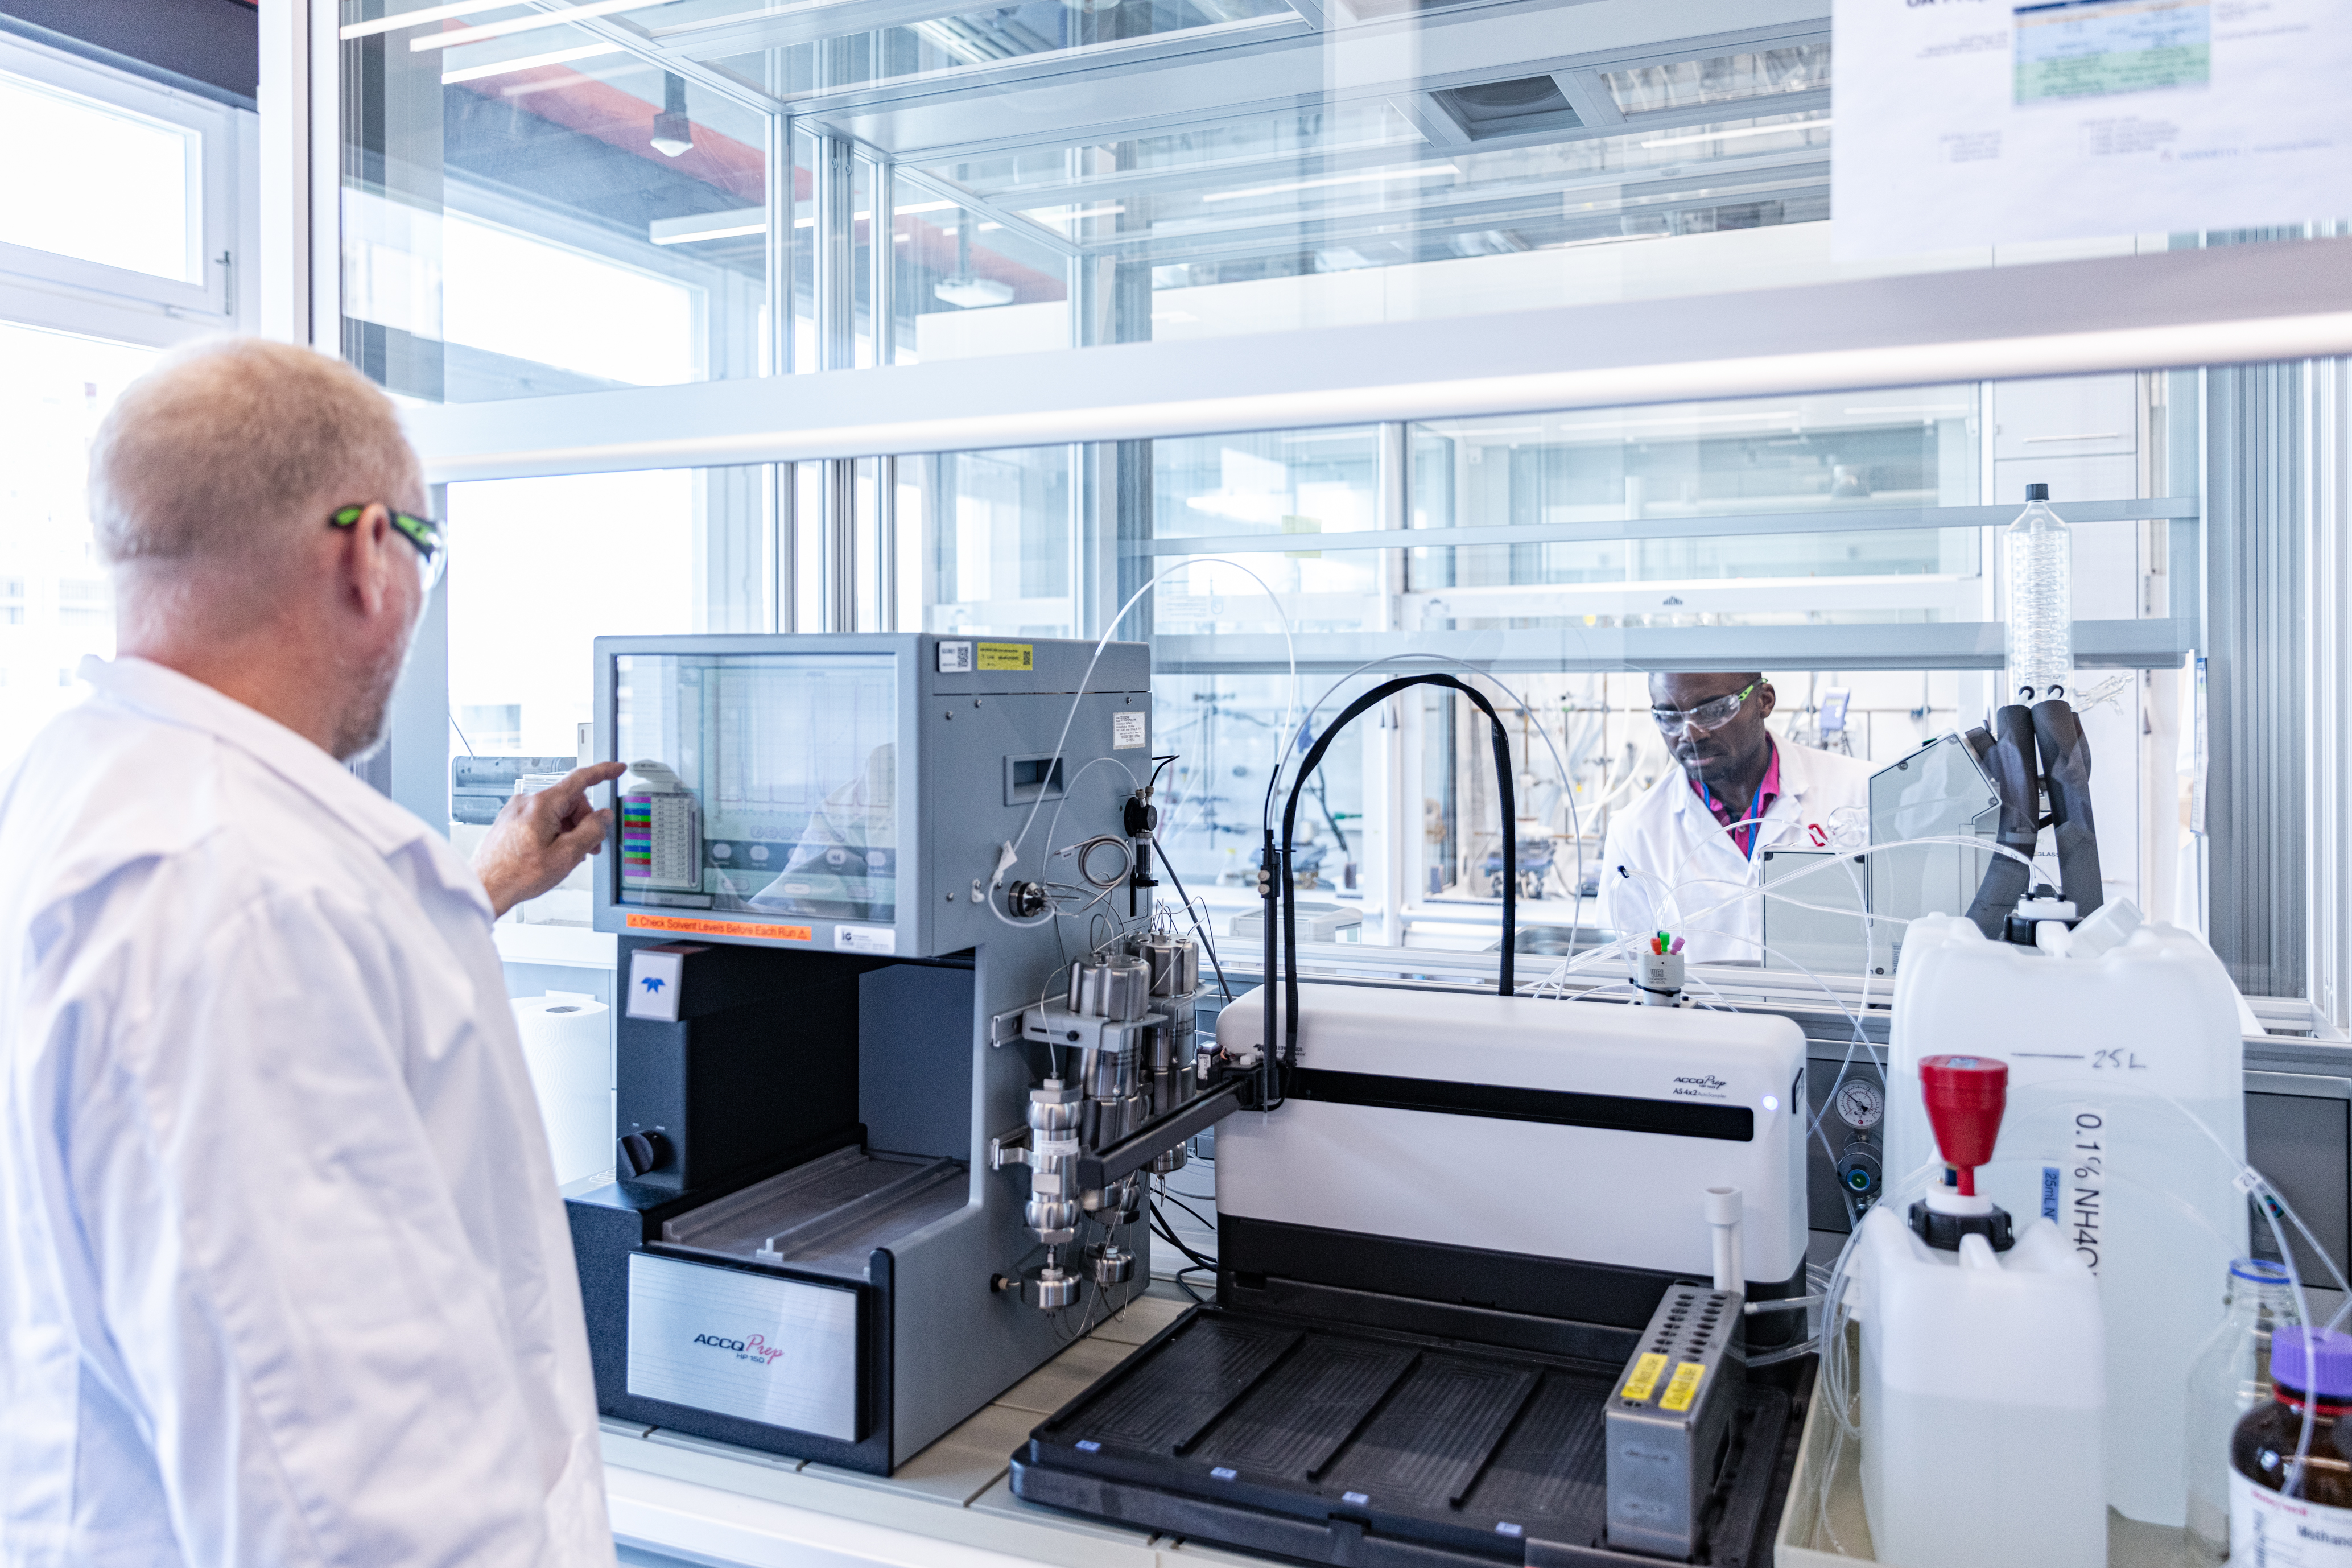 Scientists in one of the state-of-the-art laboratories of Banting 1